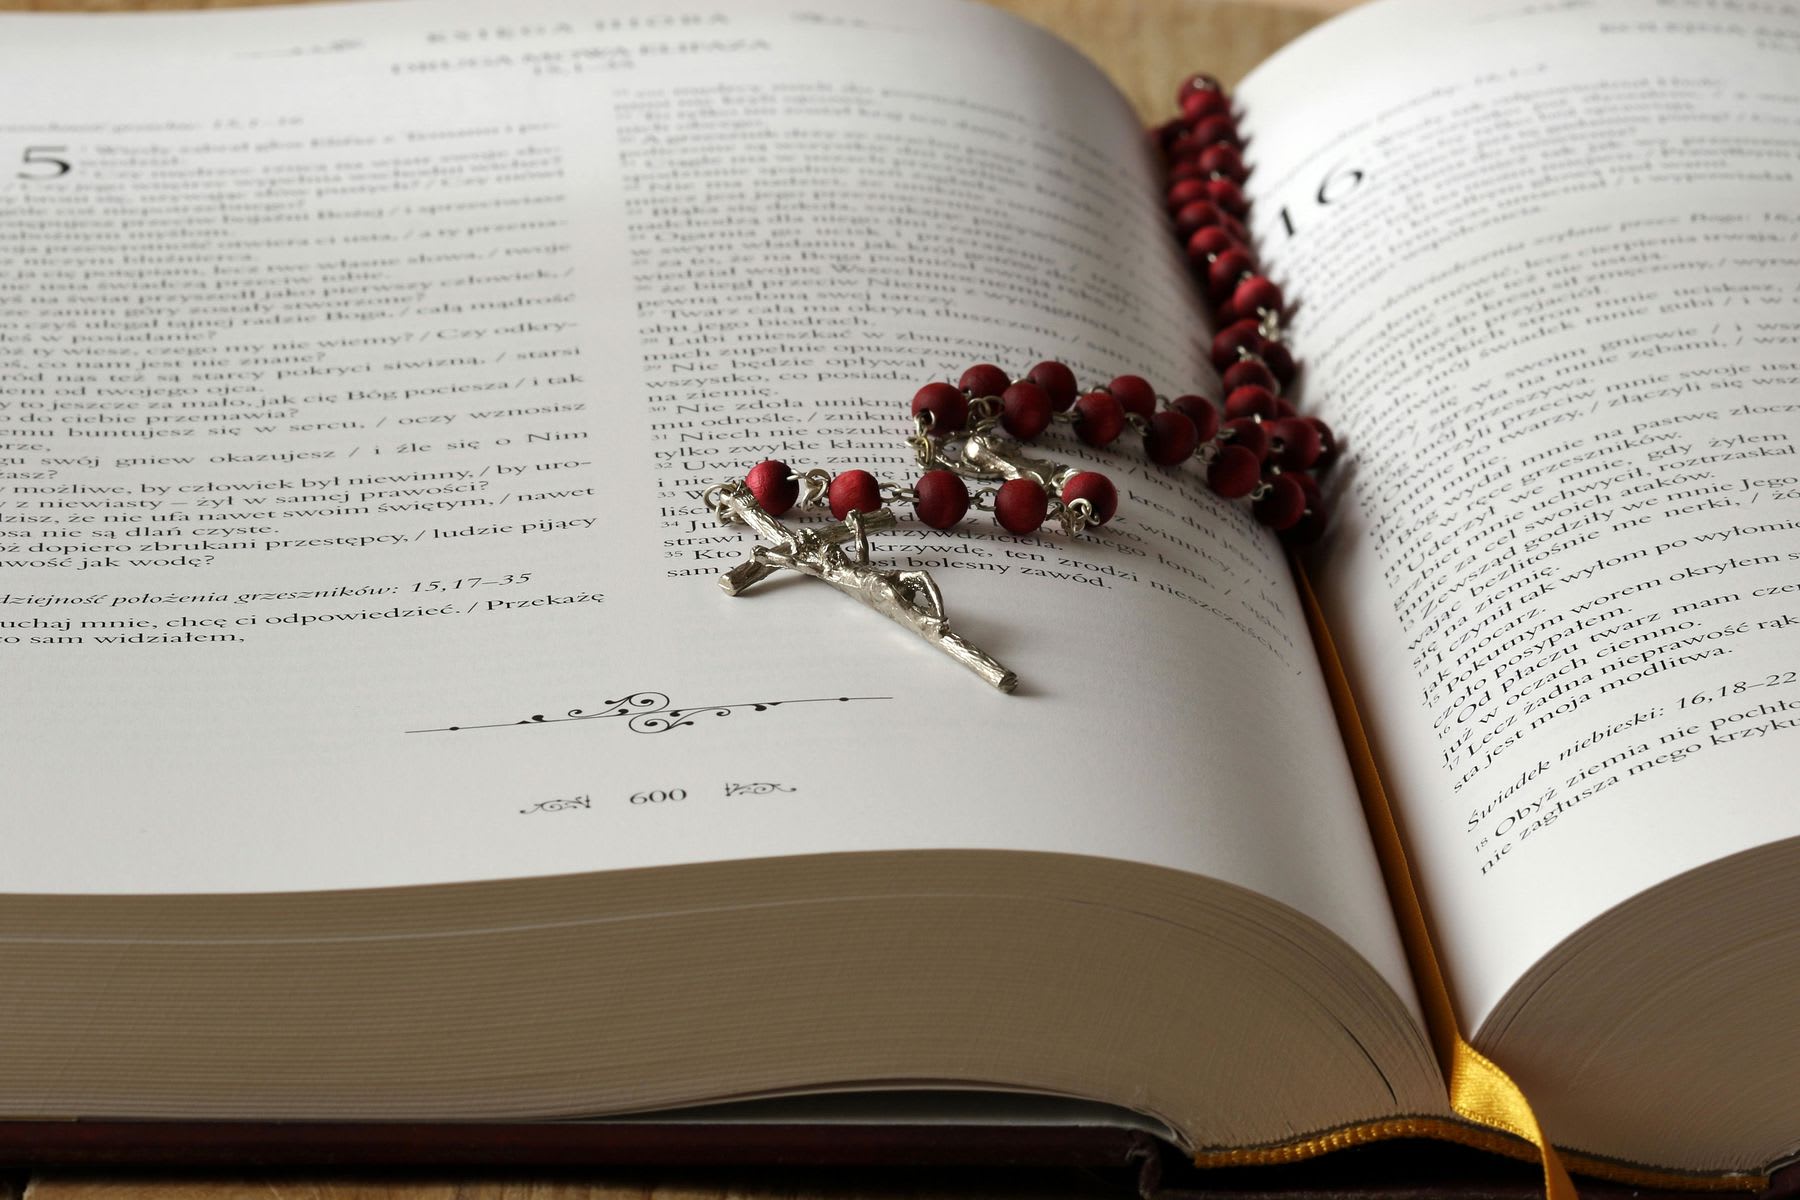 Rosary in between the pages of an opened Bible